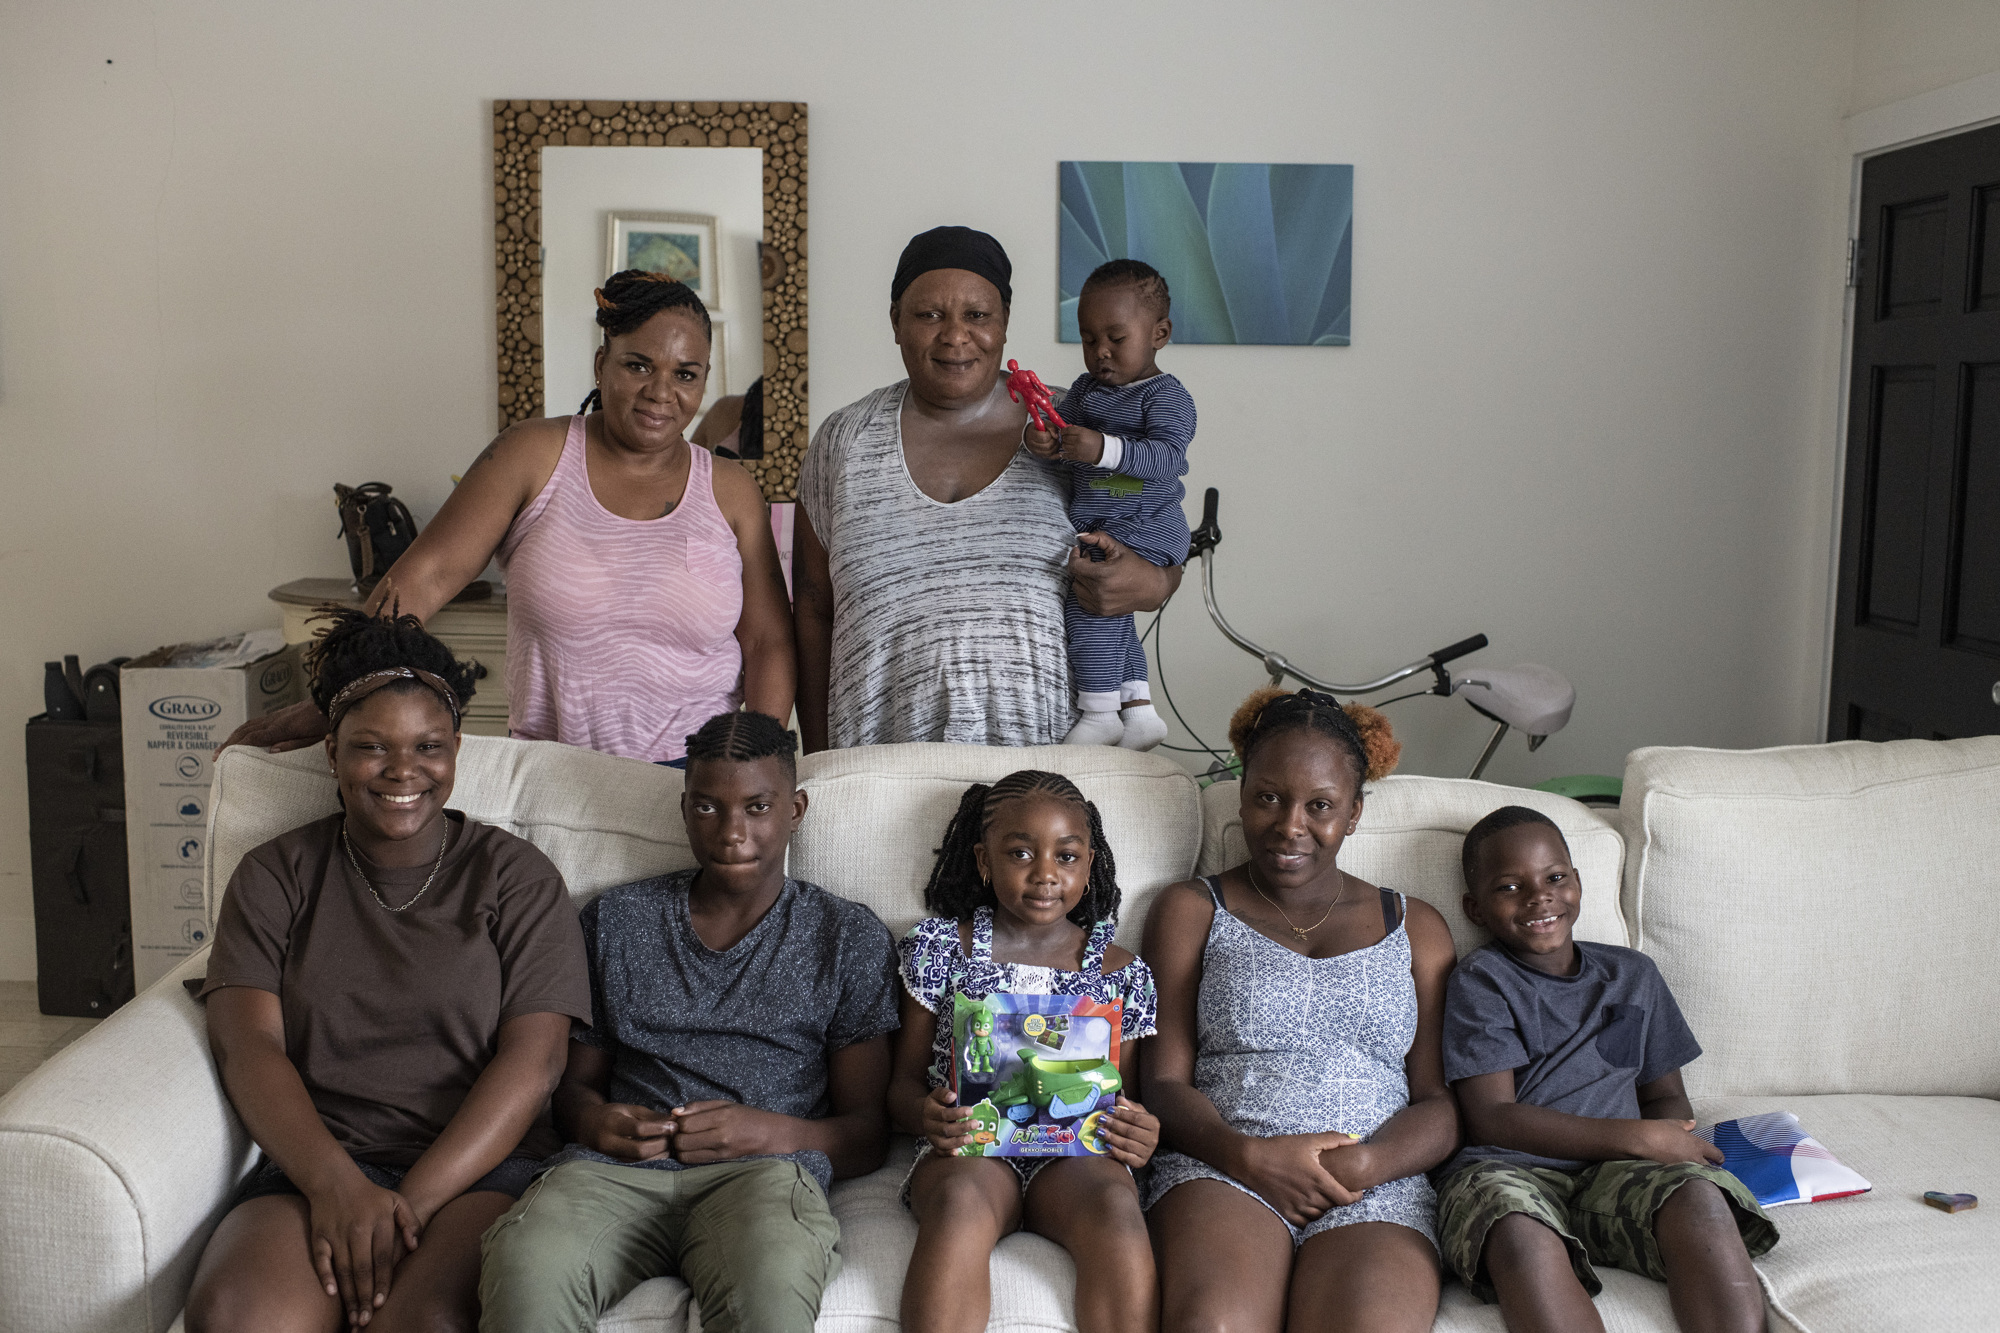 The Frank family were just some of the locals Carey Sheffield interviewed during her first trip to the Bahamas. The family was trapped in a hotel bathroom for nearly three hours during the hurricane. 